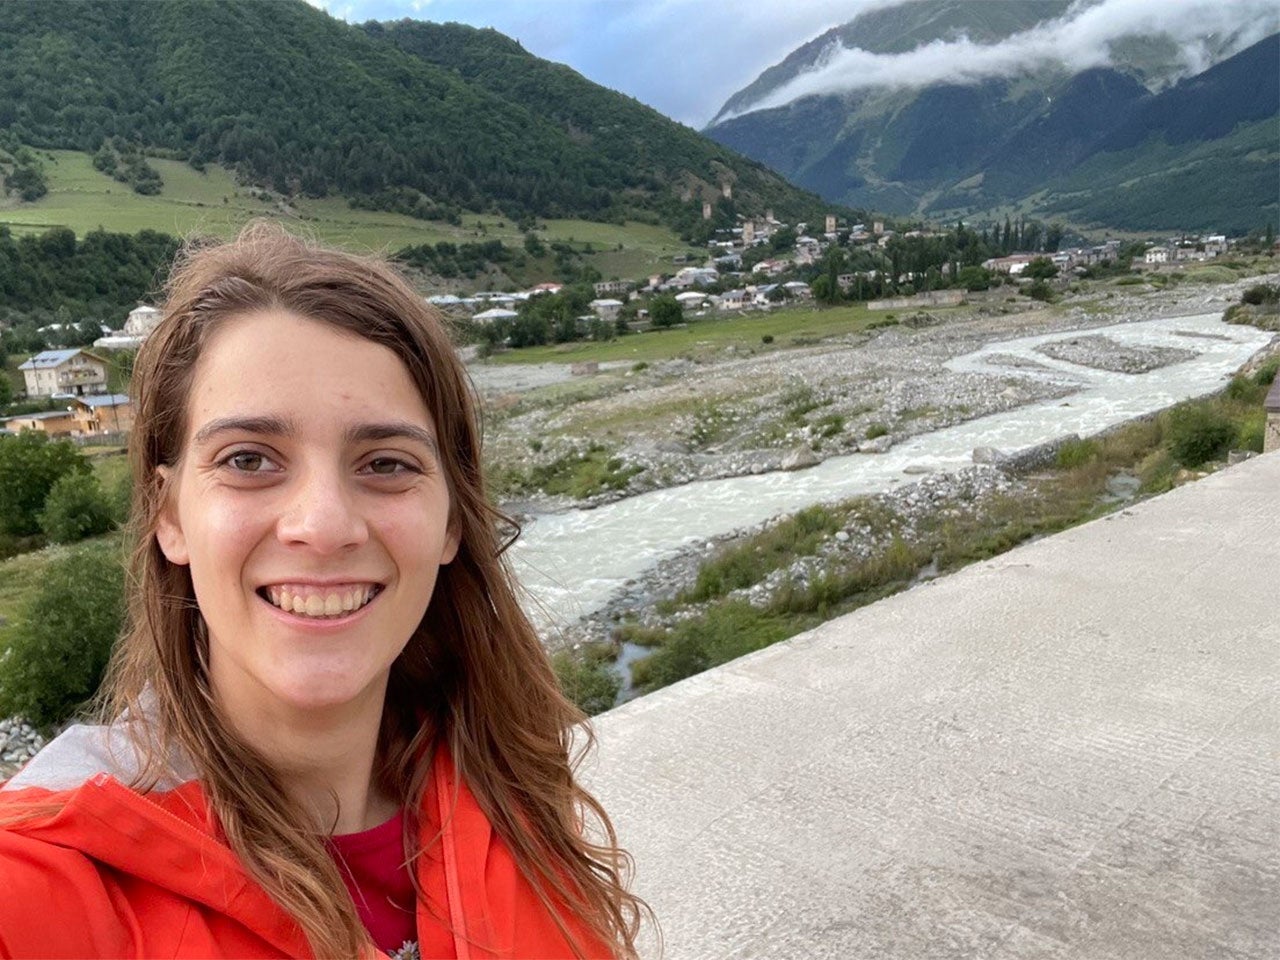 UC Davis Russian major Darian Lee poses smiling in front of a mountain vista near Tbilisi, Georgia. In the valley below, a town is visible.